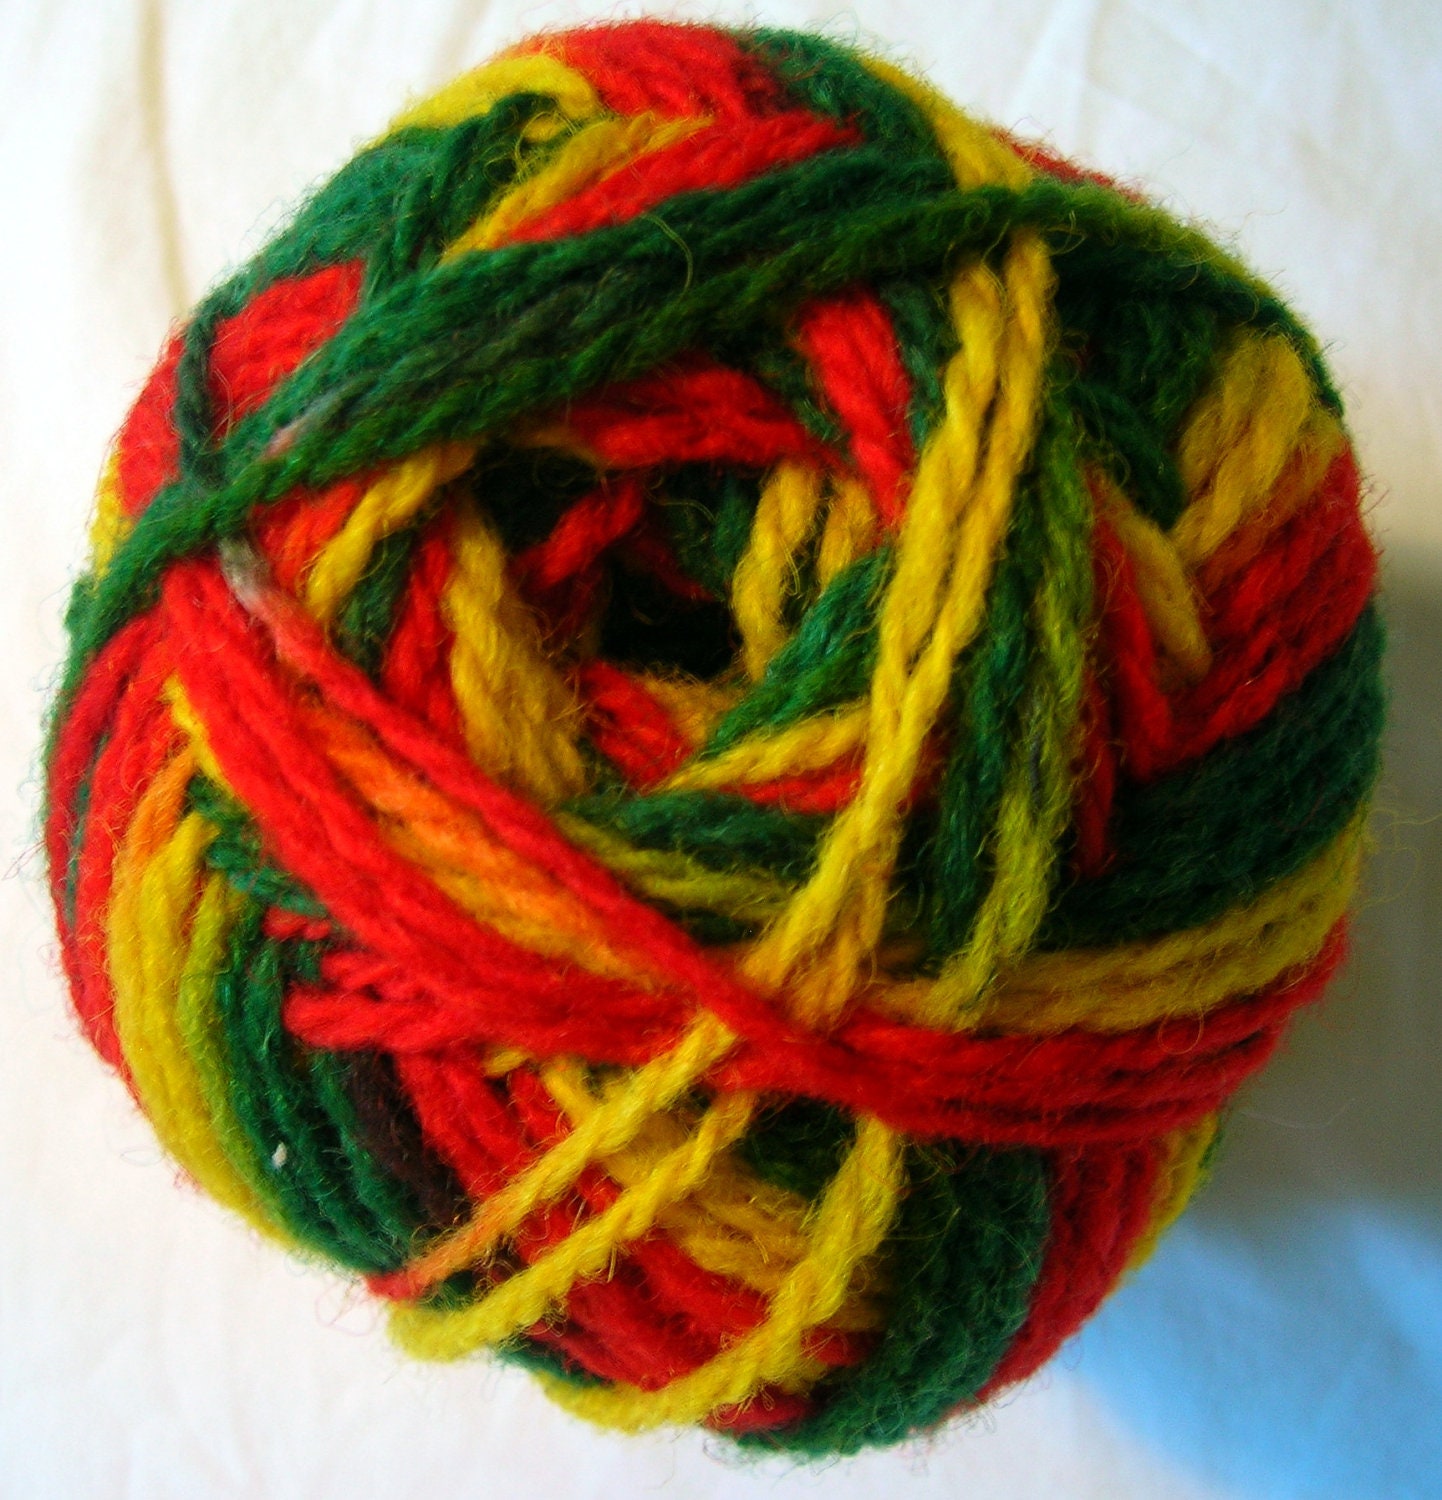 Ethno Wool Multicolor Yarn in Red, Green and Yellow 308 DSHP0 